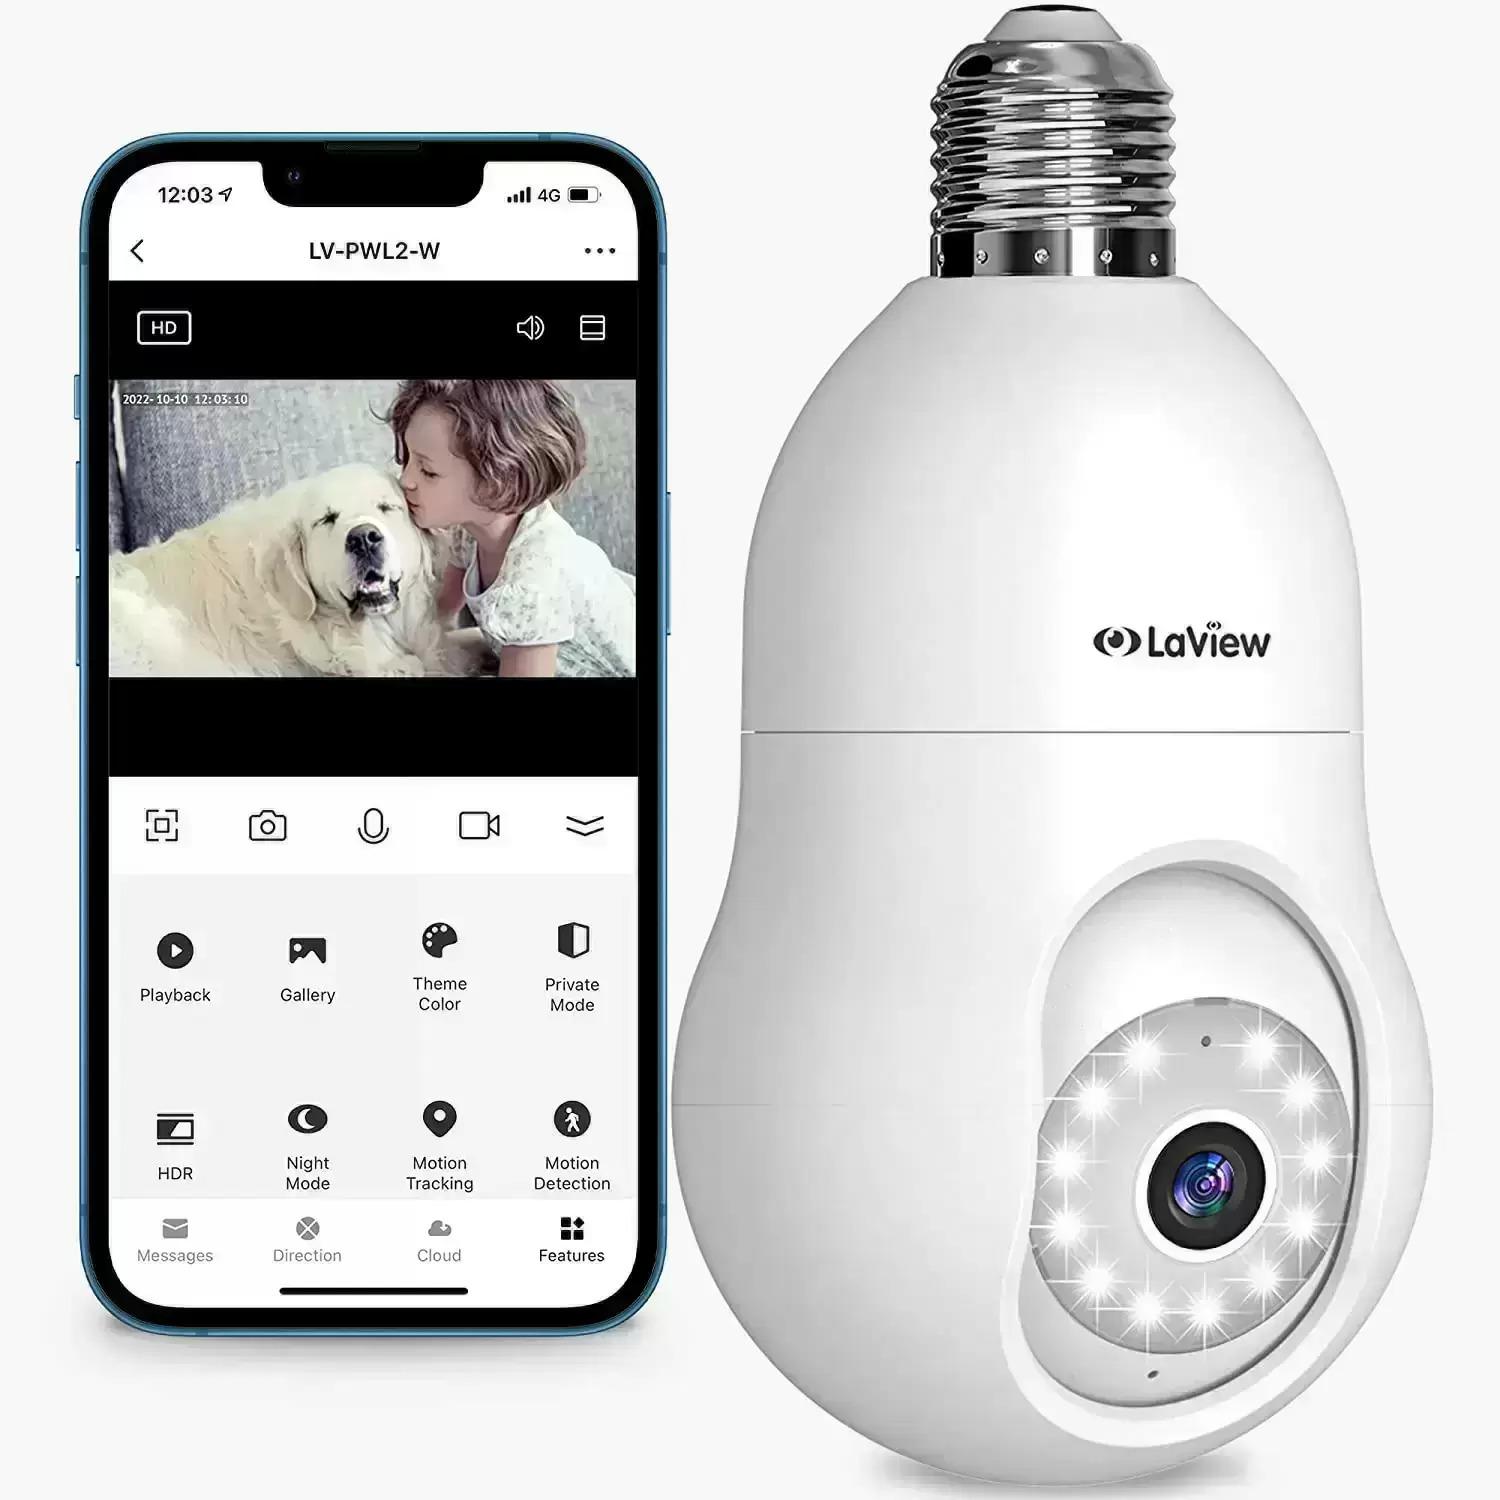 LaView 4MP Bulb Security Camera for $19.39 Shipped